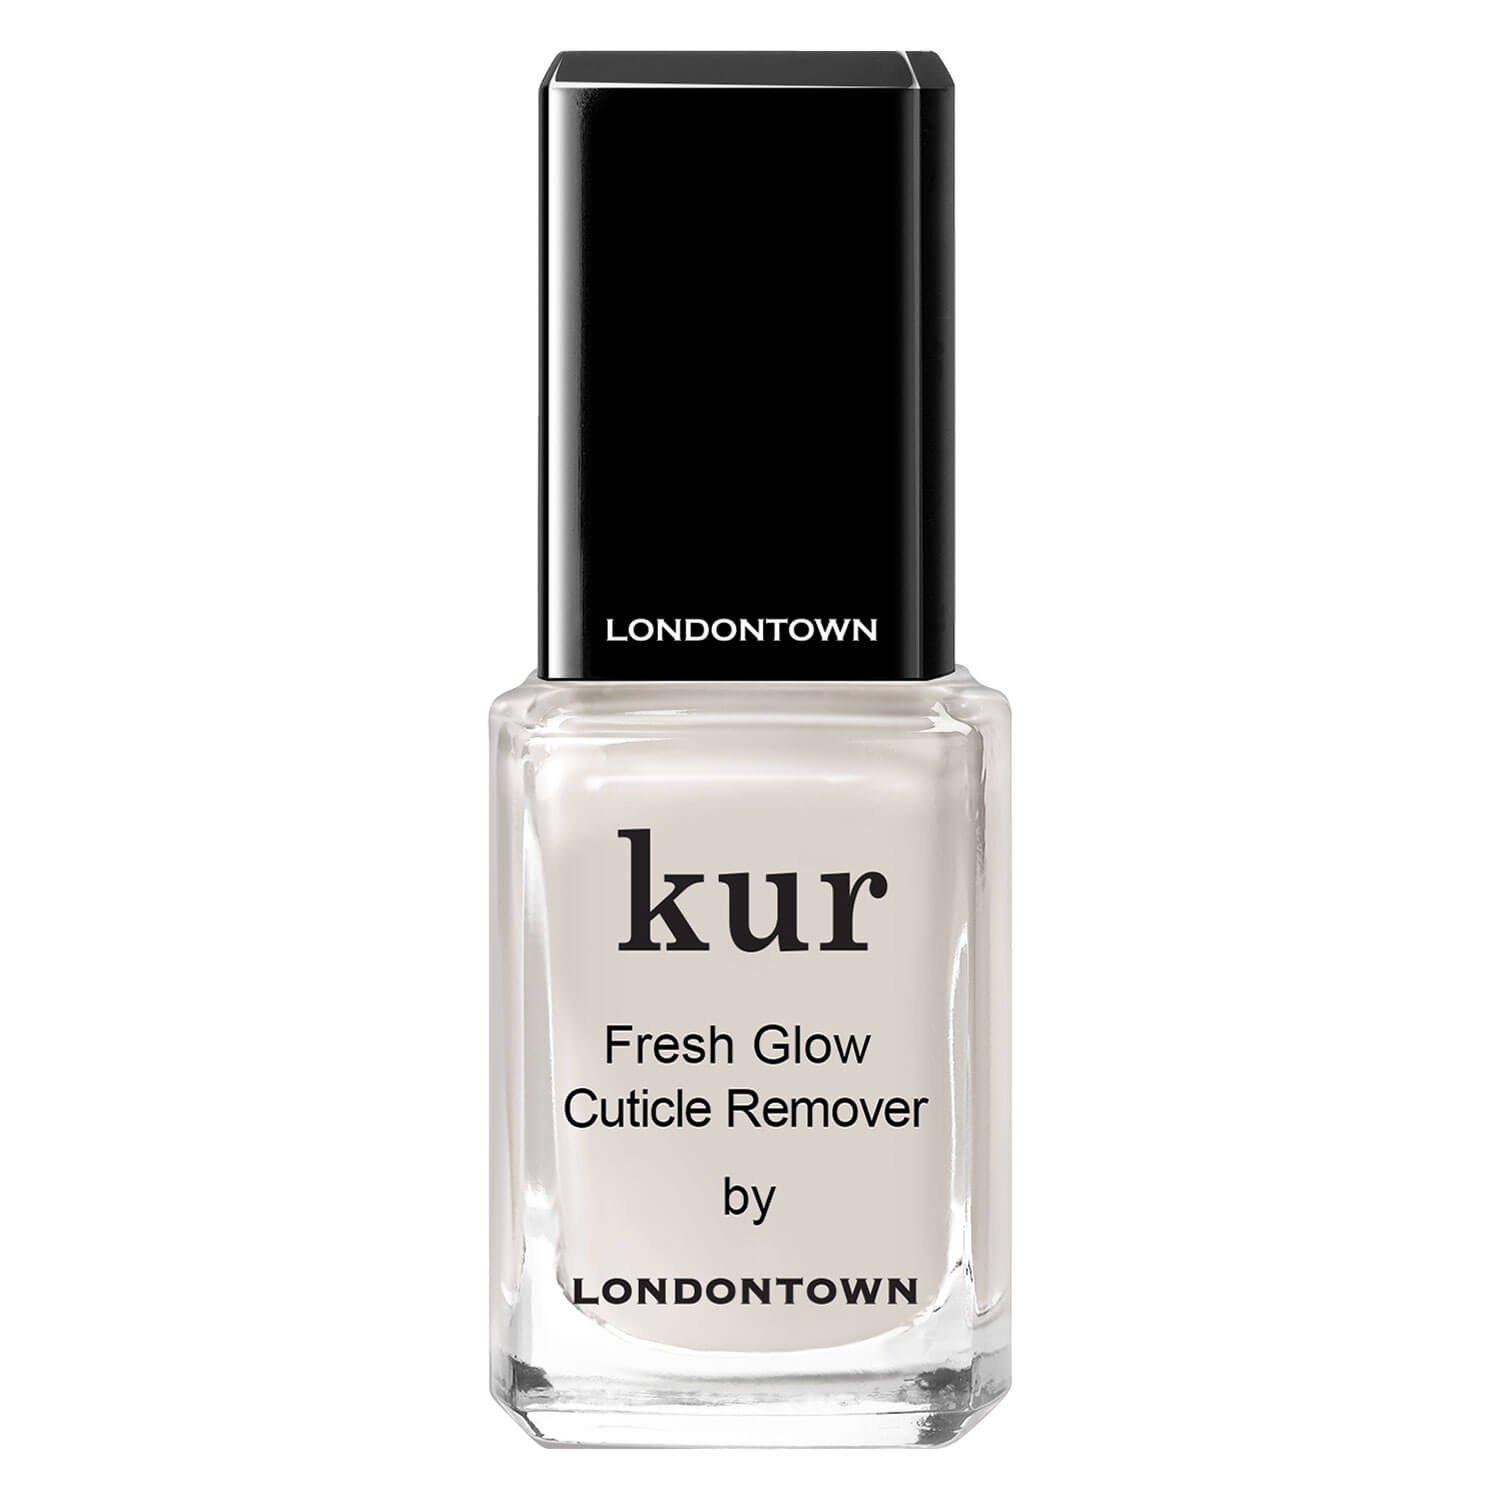 Product image from kur - Fresh Glow Cuticle Remover